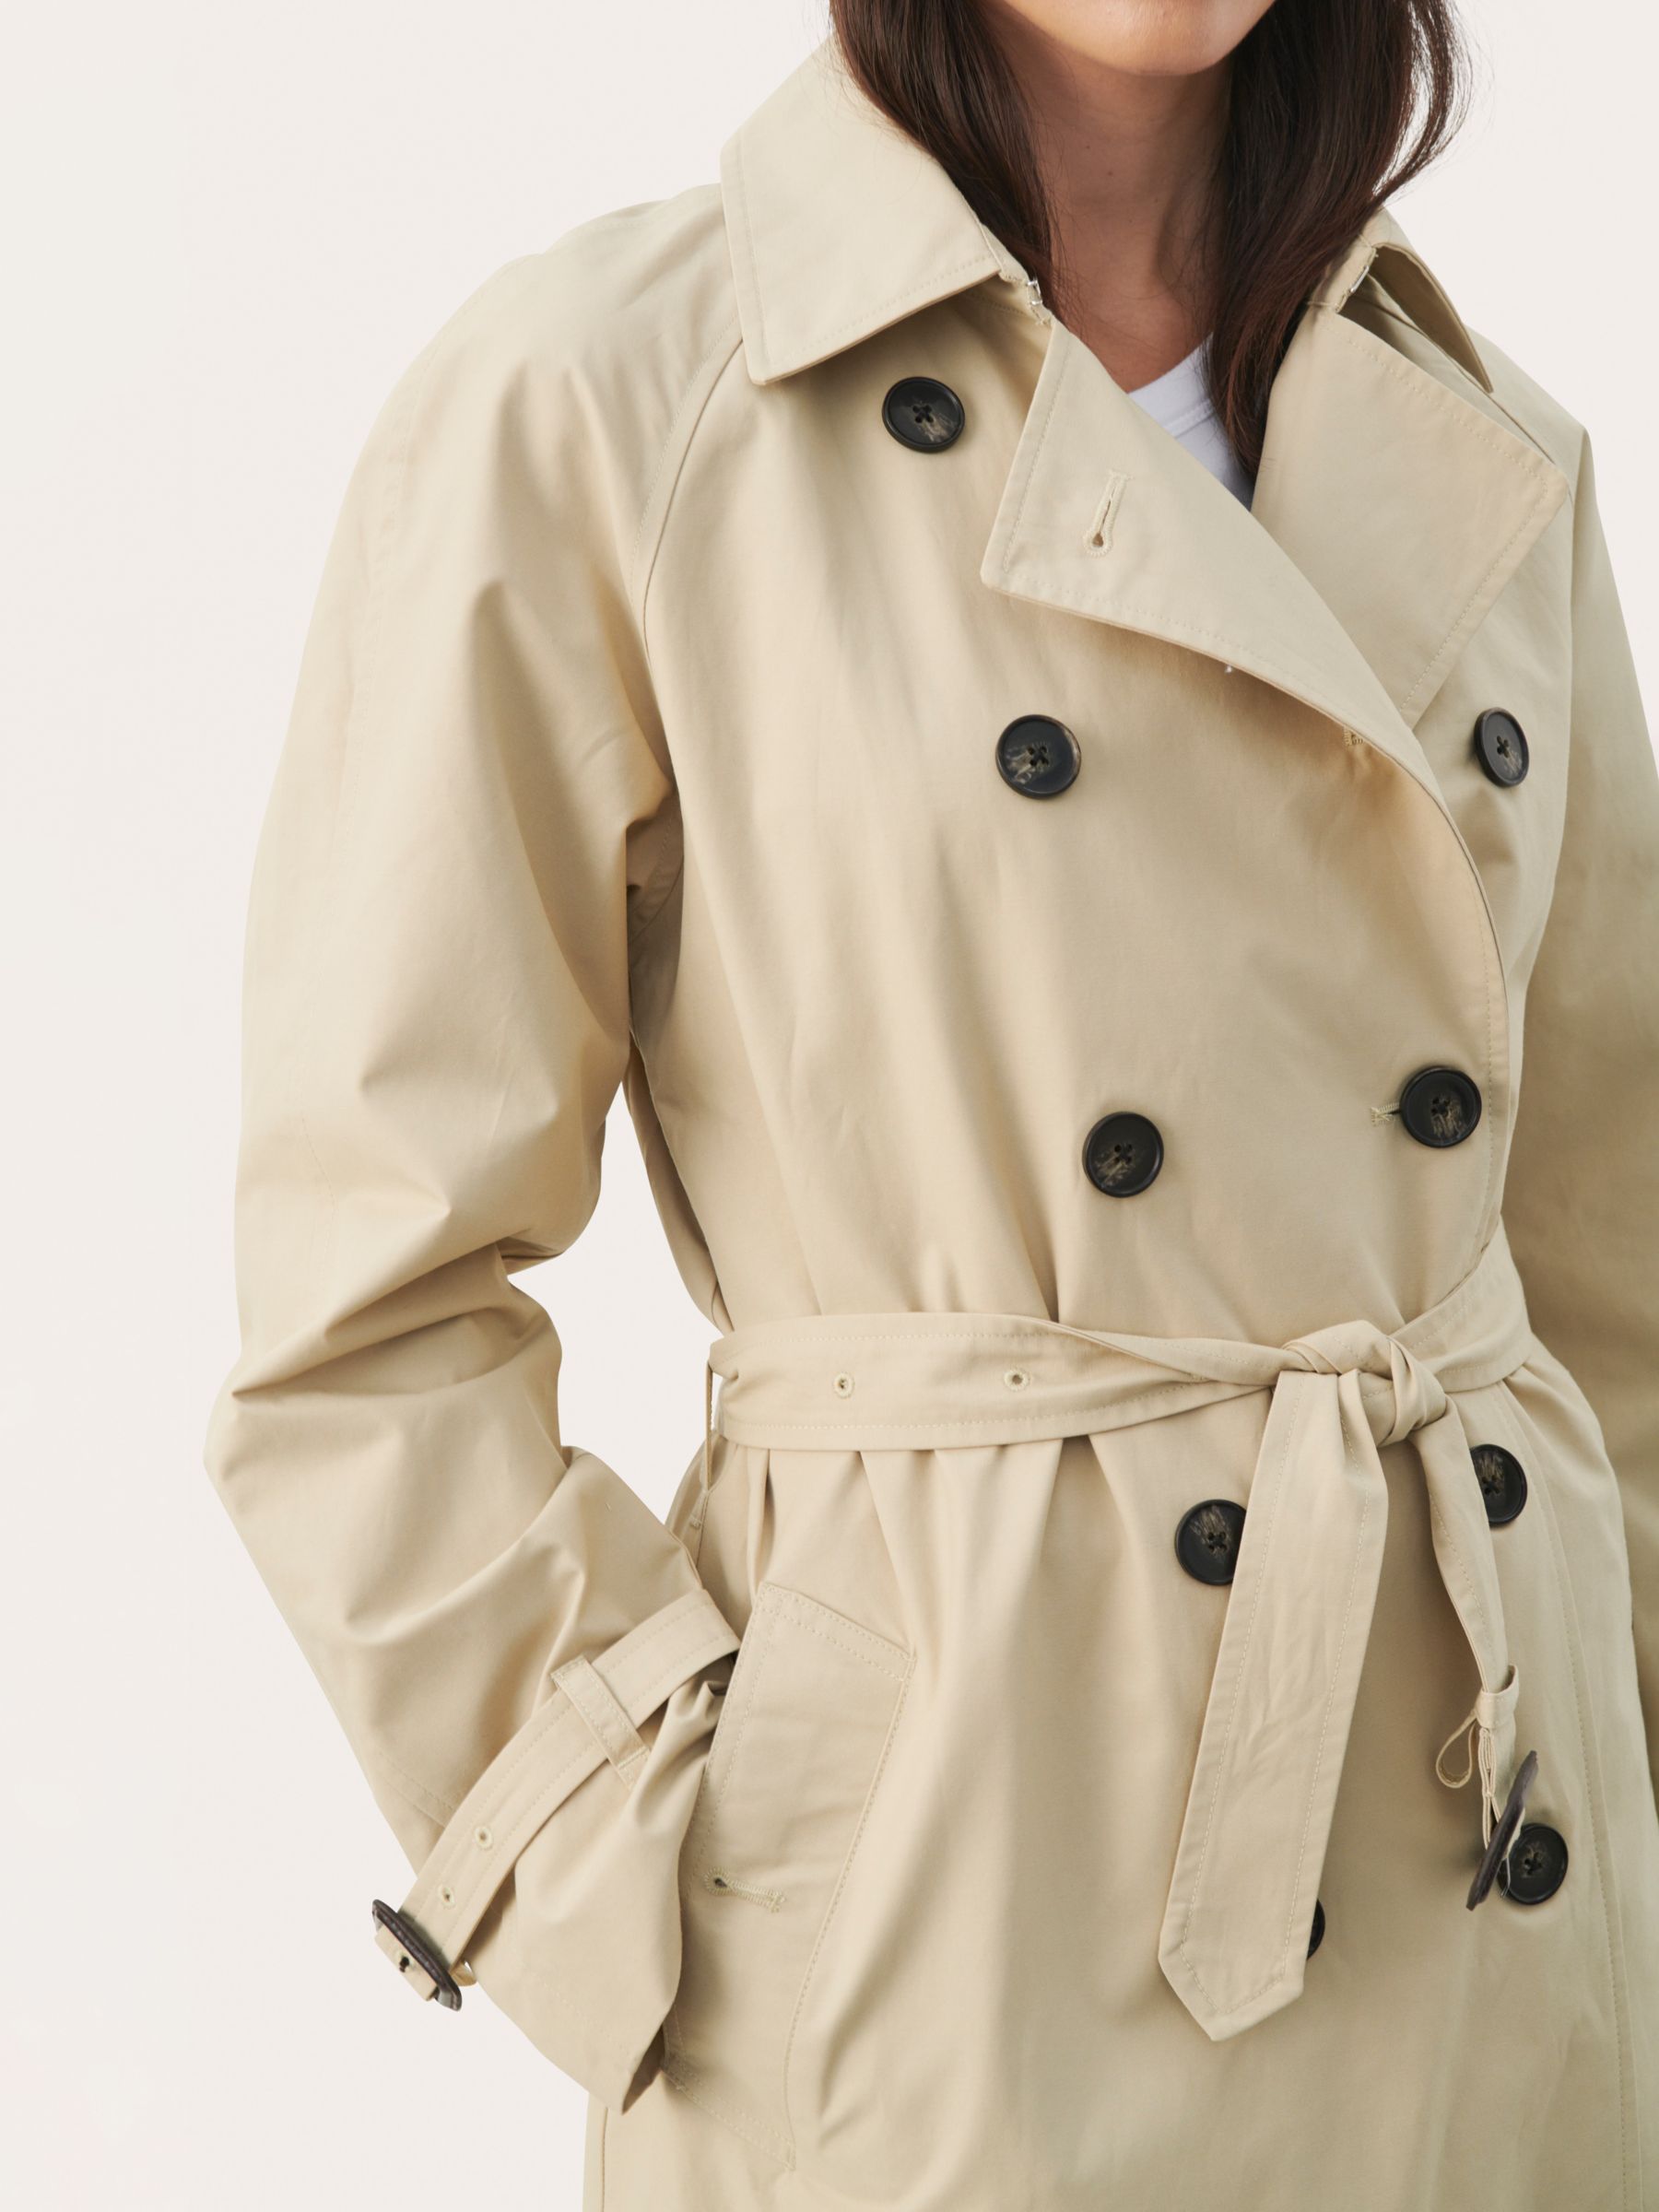 Buy Part Two Hadia Double Breasted Trench Coat, Fields Of Rye Online at johnlewis.com